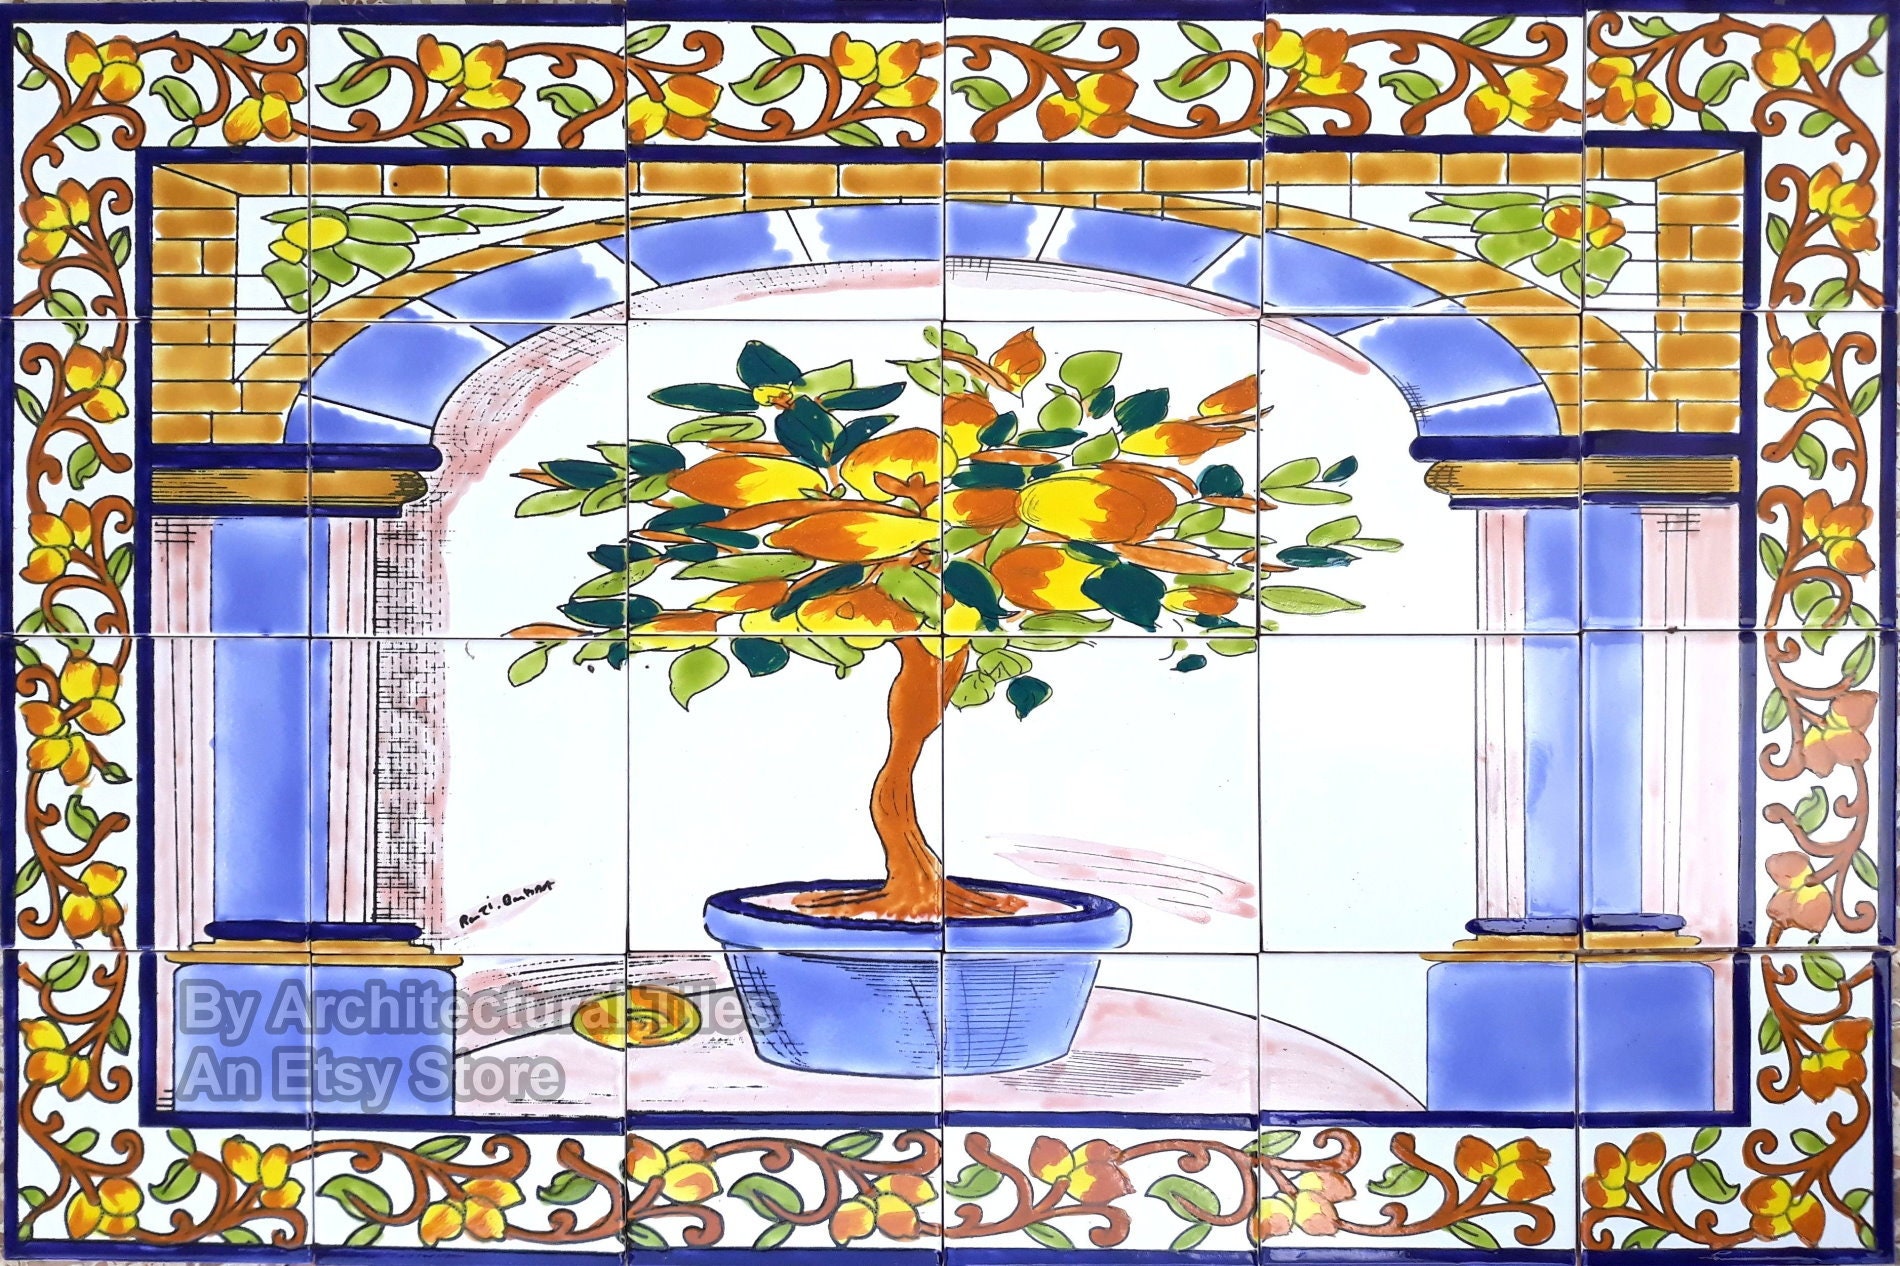 Architectural Tiles 36x24 Hand Painted Lemon Tree - Etsy